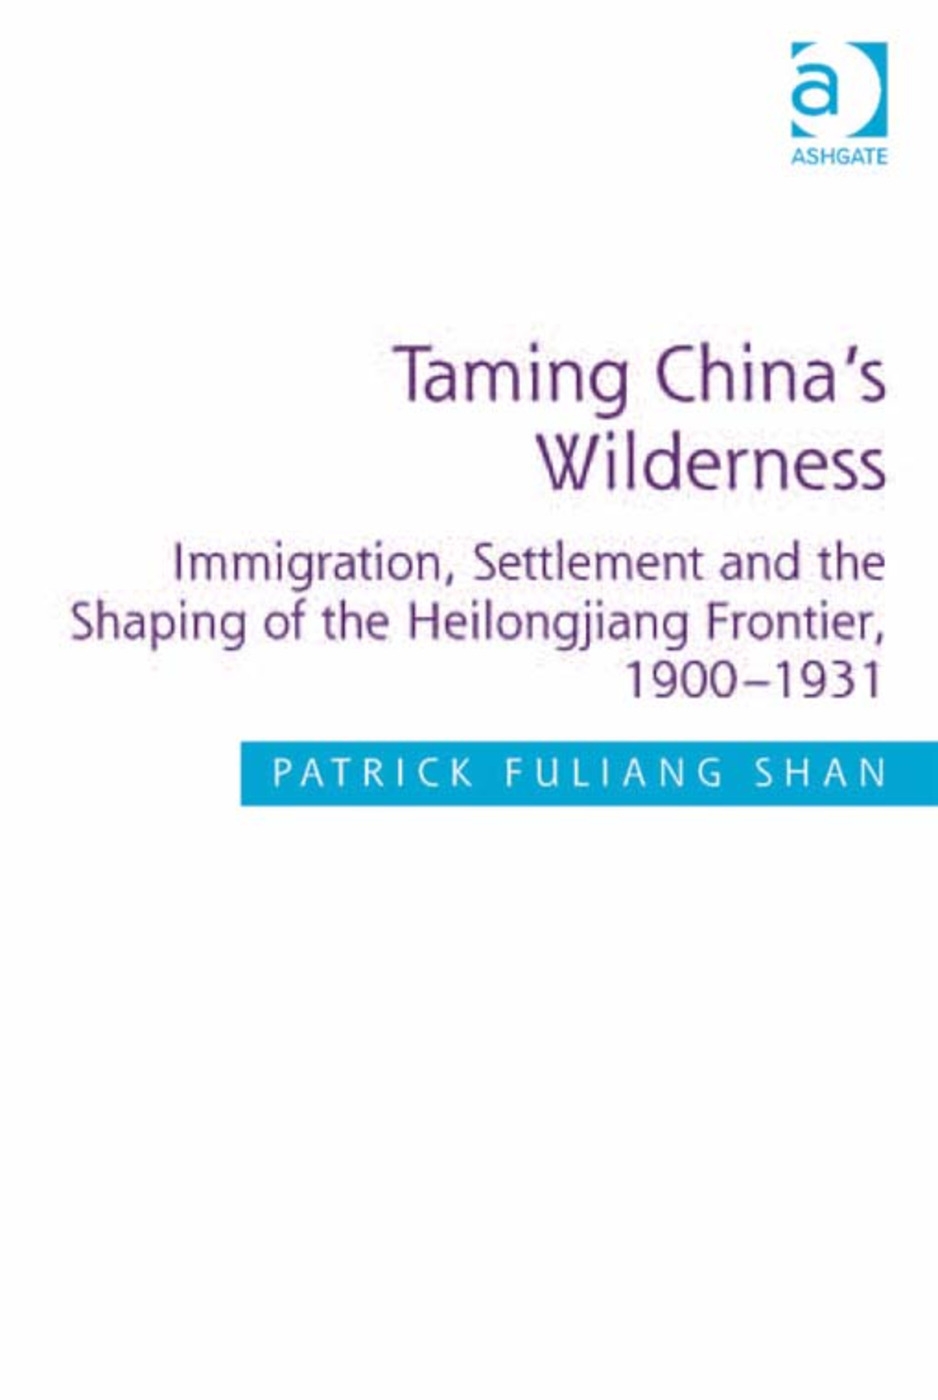 Taming China’s Wilderness: Immigration, Settlement and the Shaping of the Heilongjiang Frontier, 1900-1931. by Patrick Fuliang Shan